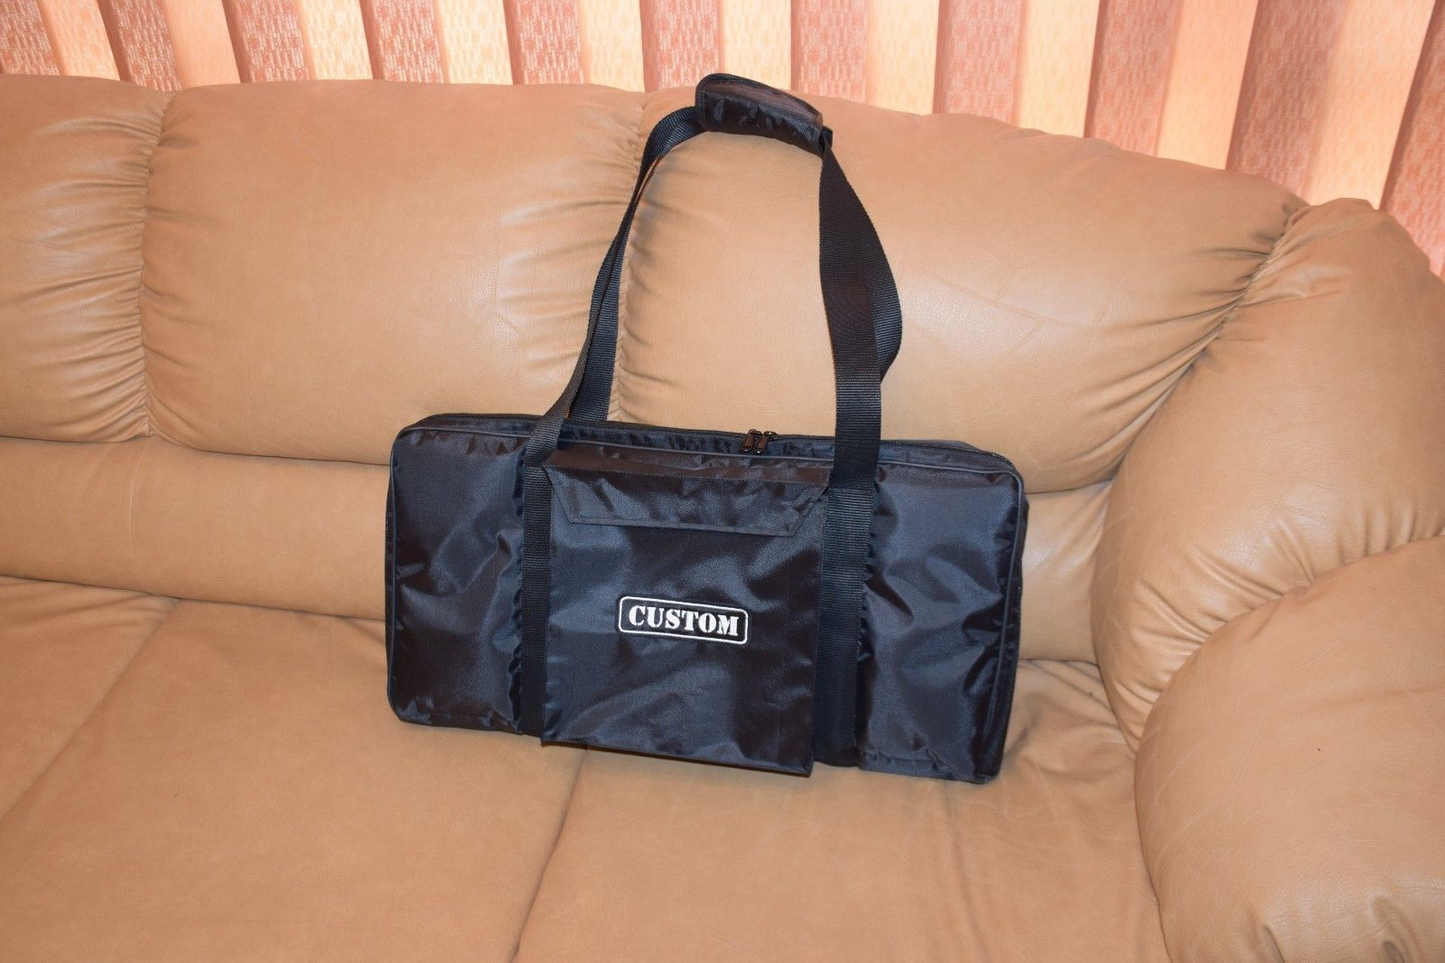 Custom double padded travel bag for Custom Pedalboard (22” x 10” x 7”) with Mounted Pedals